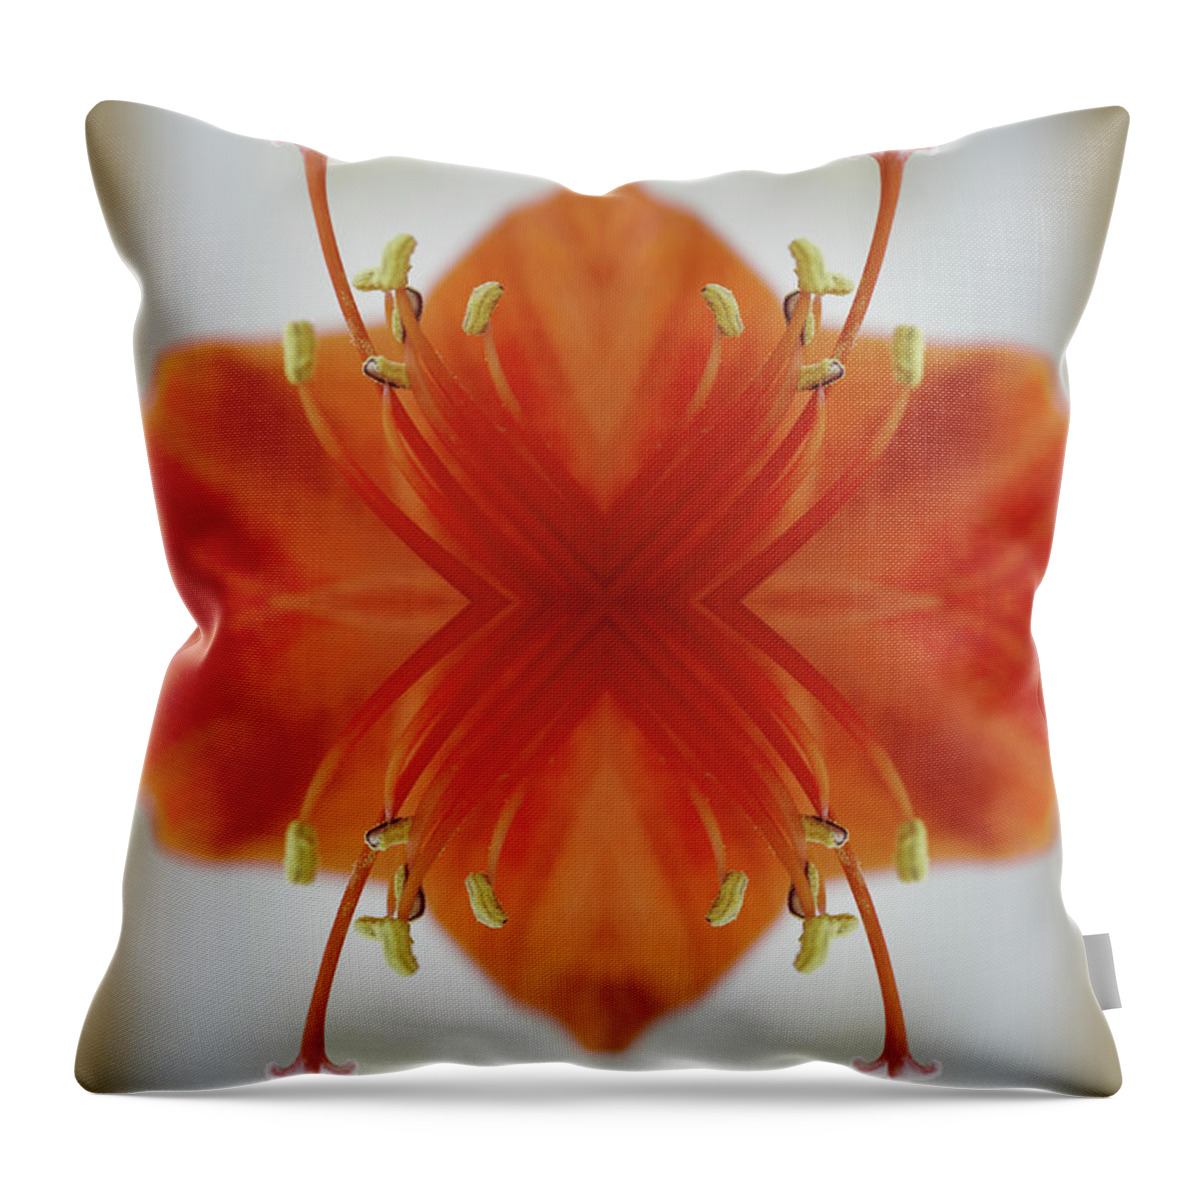 Tranquility Throw Pillow featuring the photograph Red Amaryllis Flower by Silvia Otte